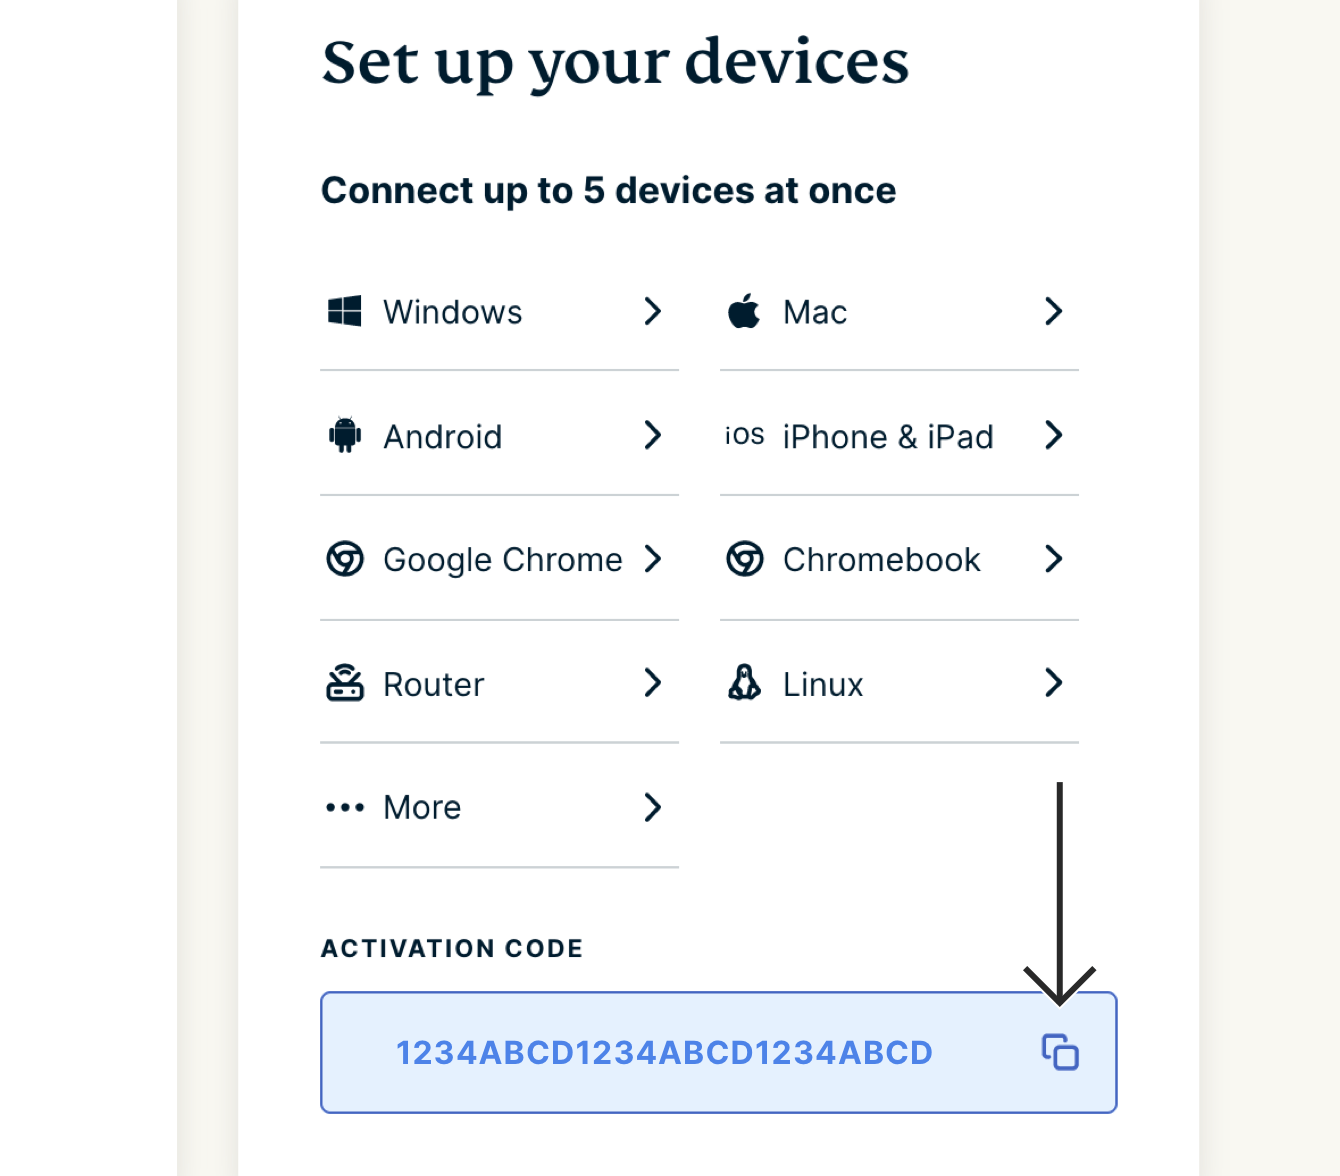 Click the activation code in the box to copy it to your clipboard.